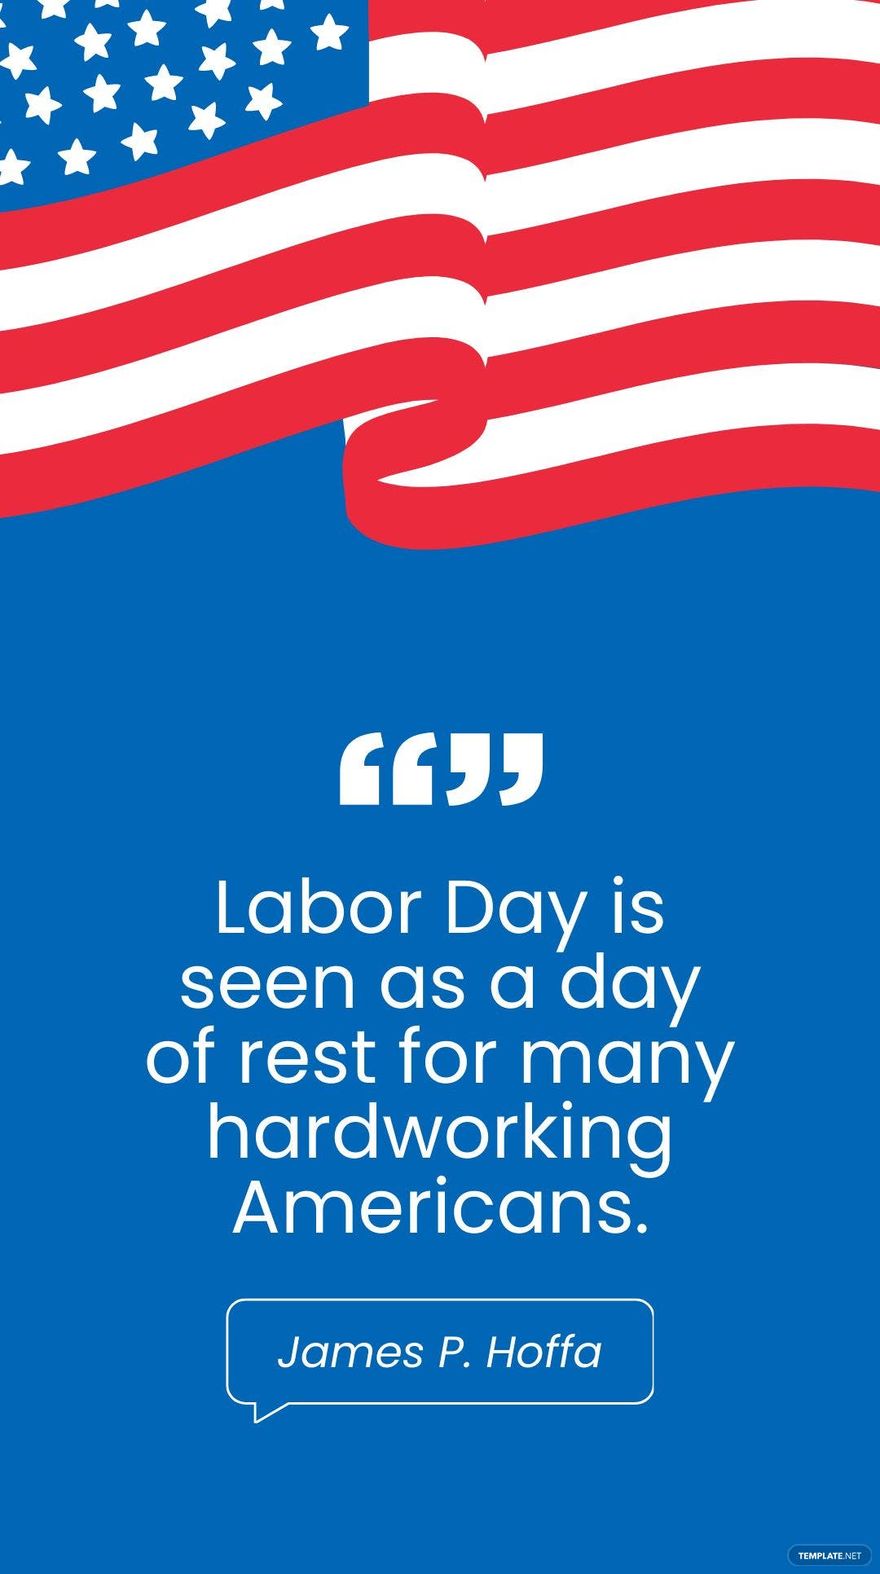 James P. Hoffa - Labor Day is seen as a day of rest for many hardworking Americans.